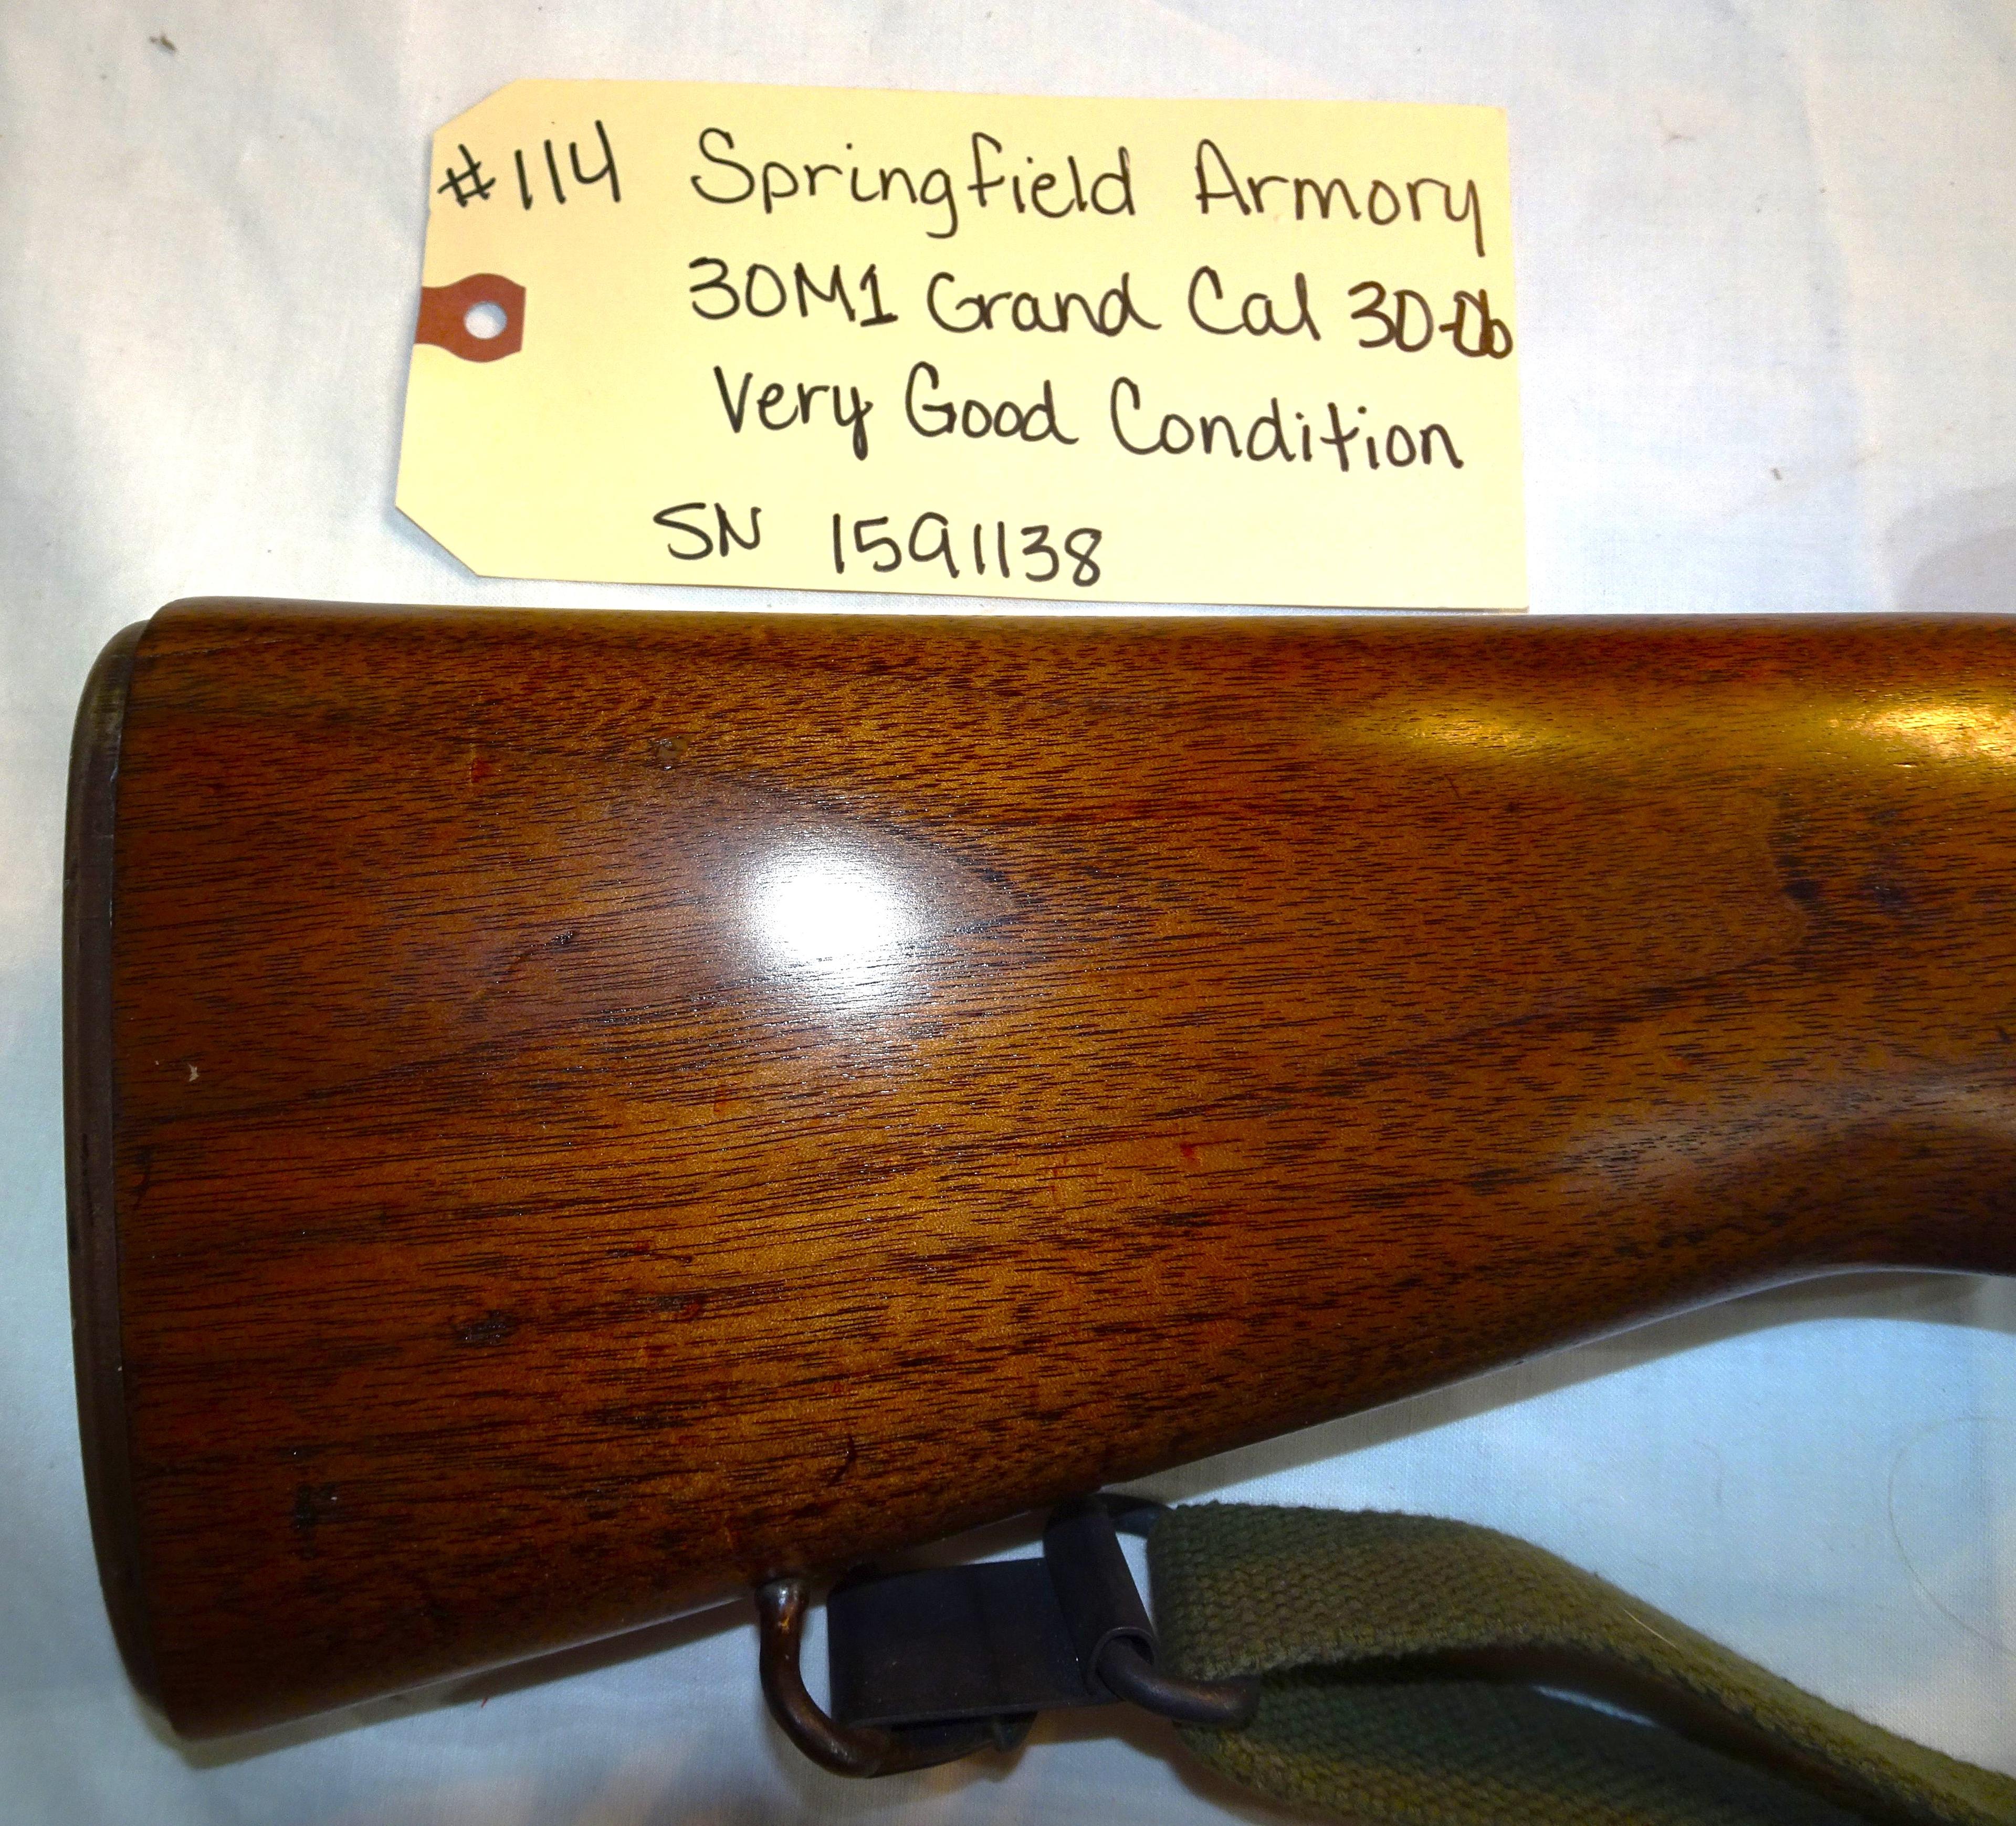 Springfield Armory 30M1 Grand Cal 30-06 Very Good Condition